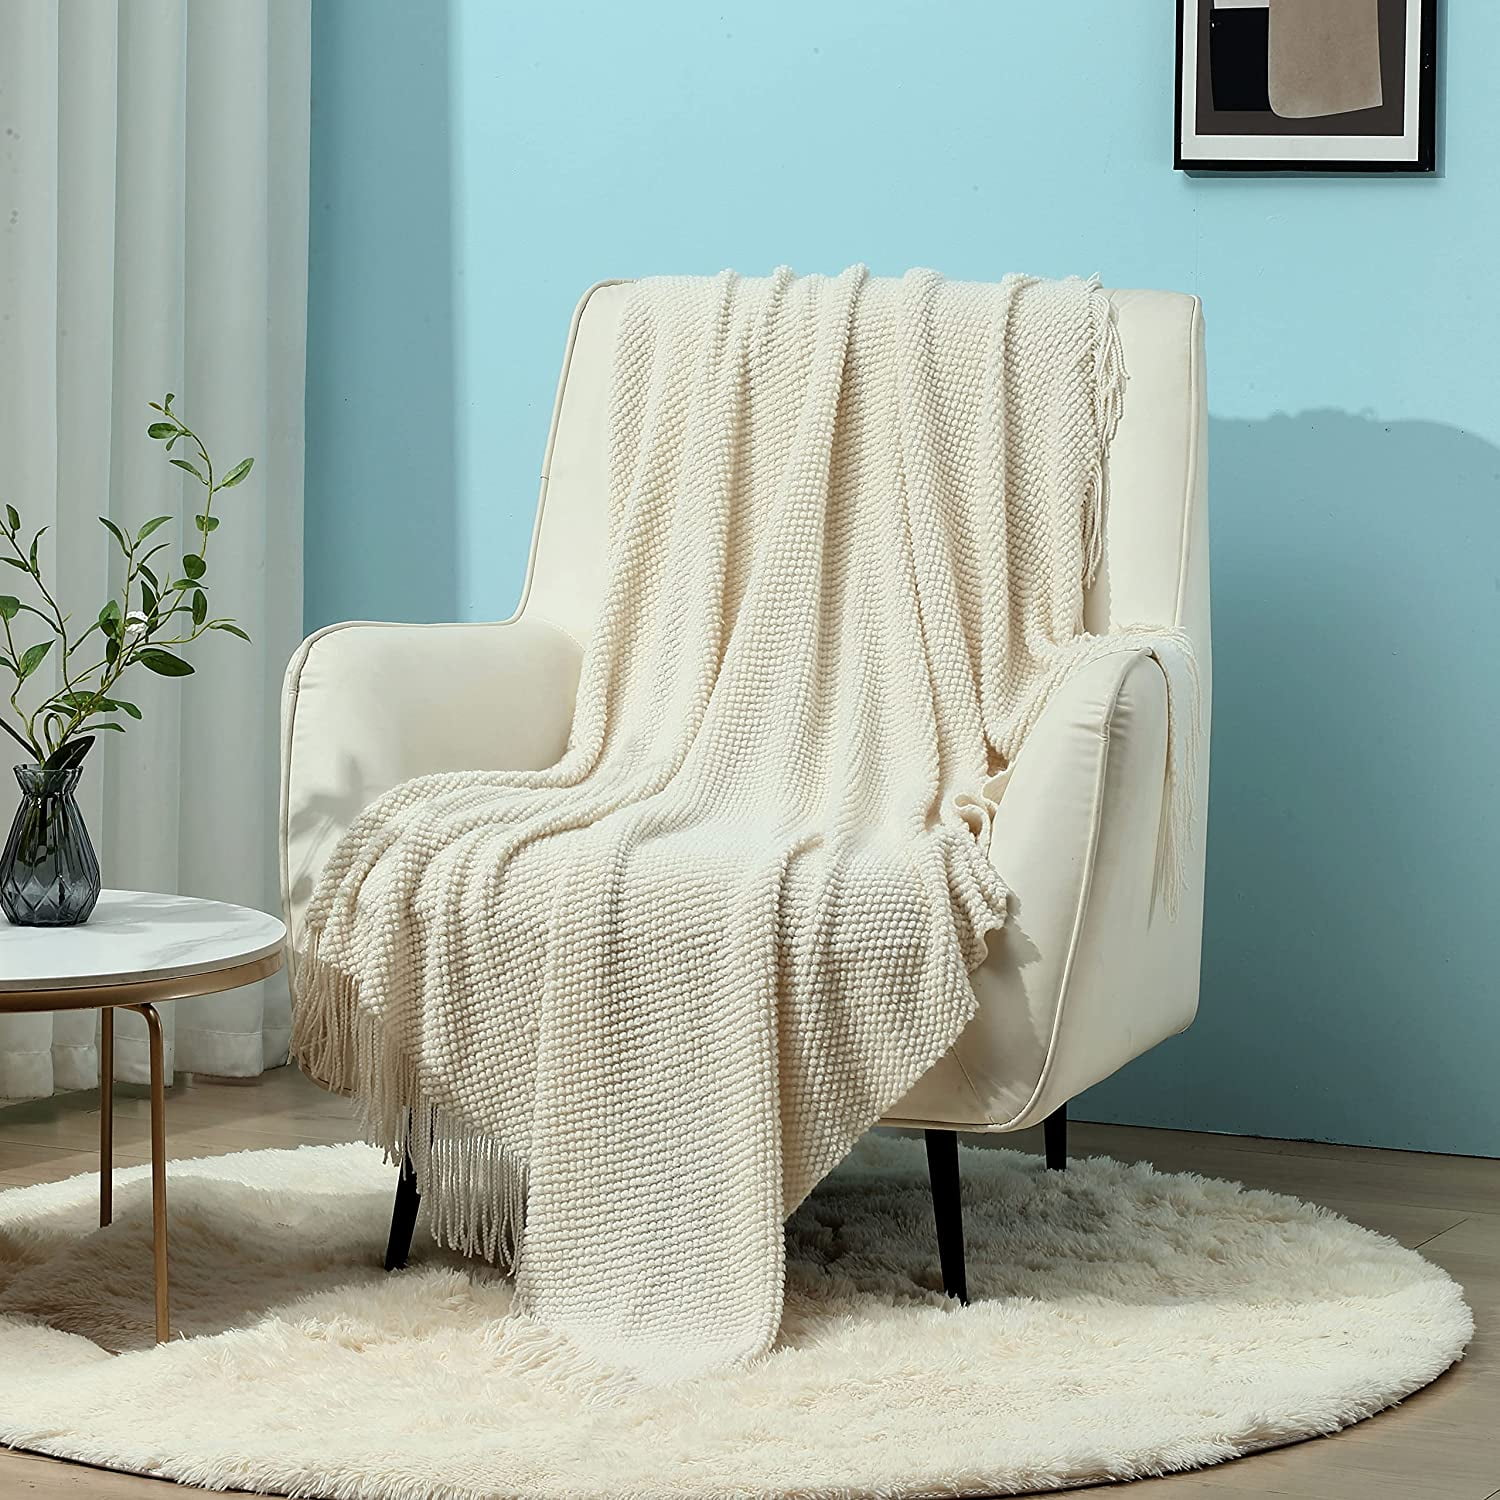 CREVENT Lightweight Knit Throw Blanket for Couch Sofa Chair - Soft and ...